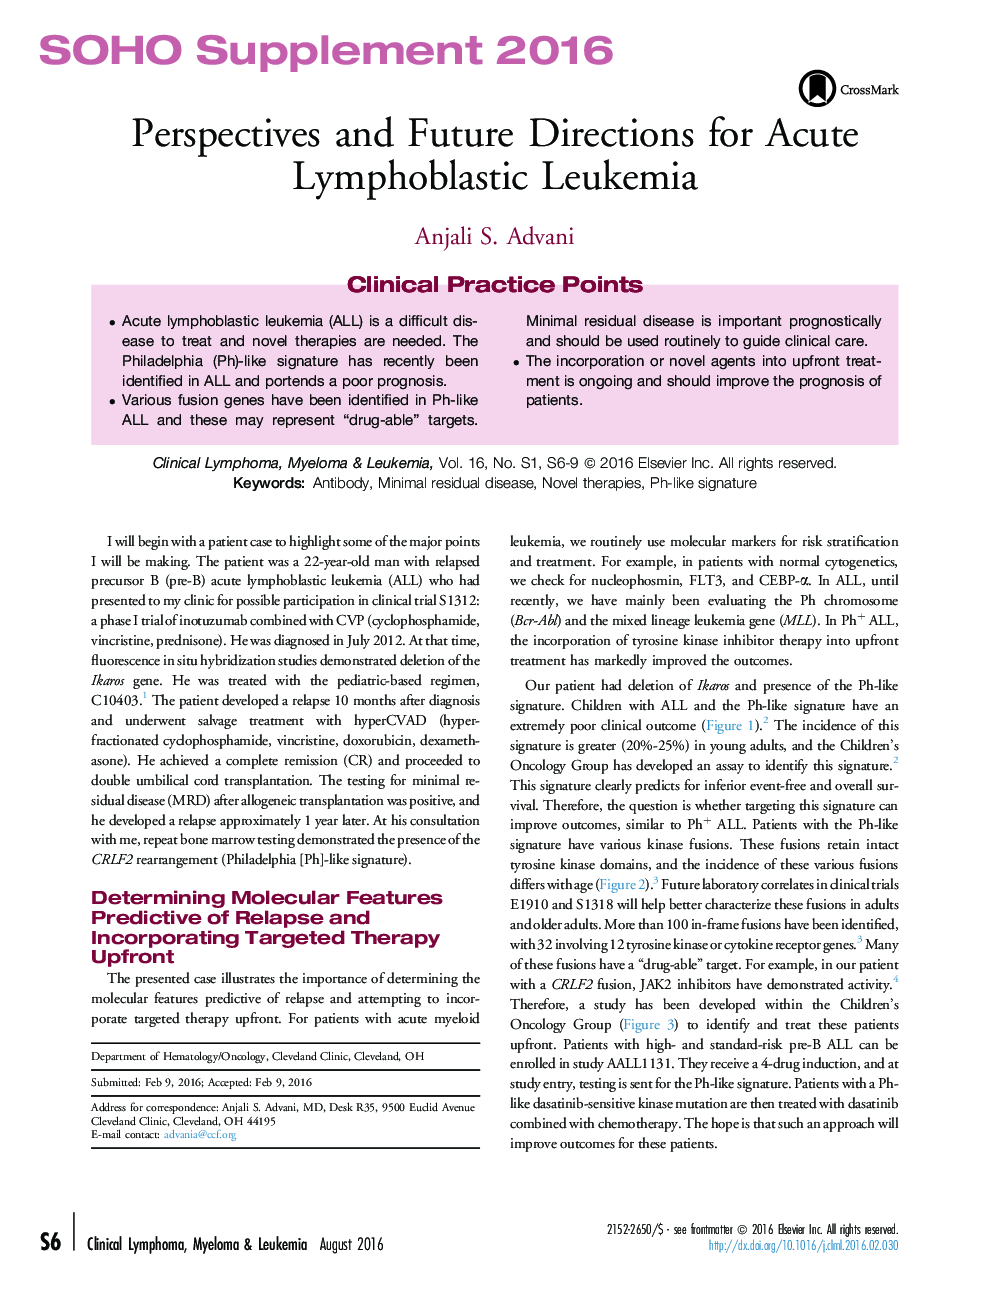 Perspectives and Future Directions for Acute Lymphoblastic Leukemia